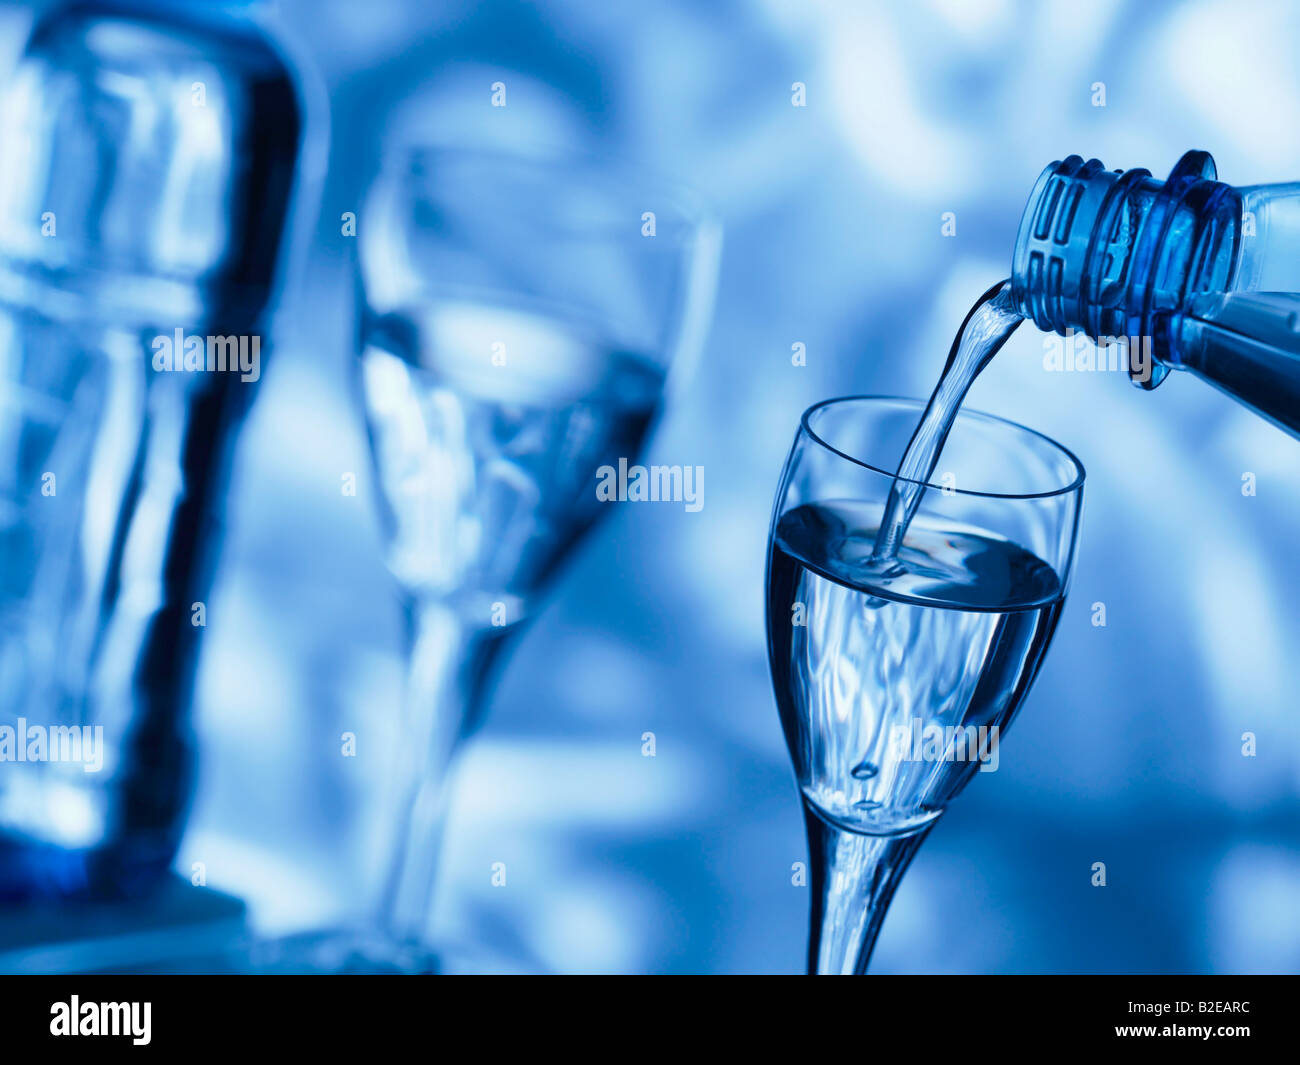 Close-up of water being poured into stem glass Stock Photo